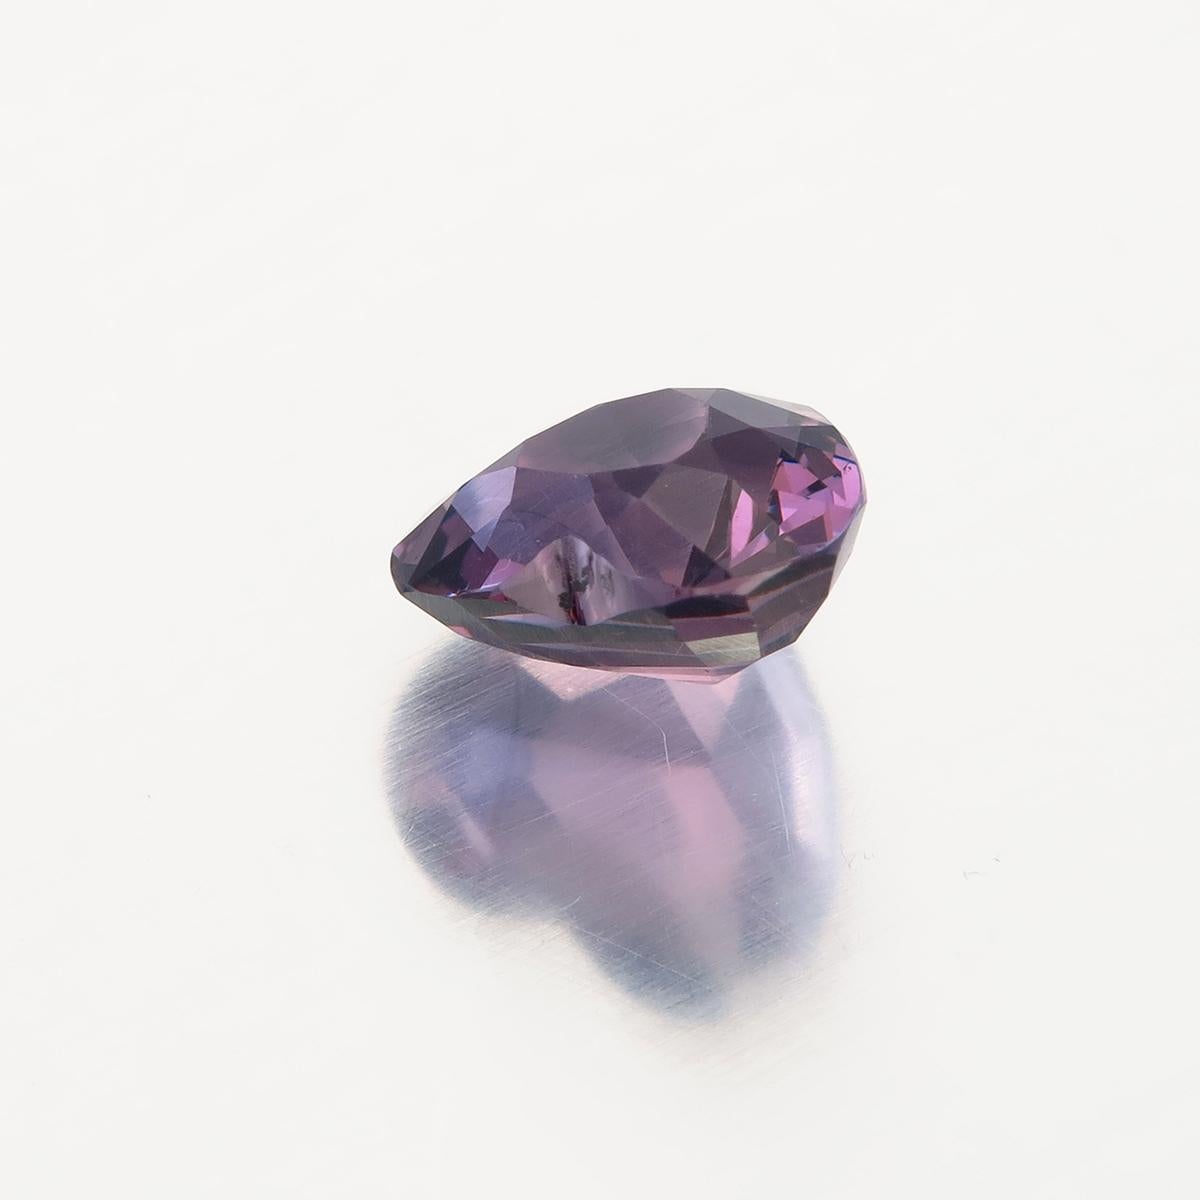 Antique Cushion Cut 1.50 Carat Pinkish Purple Spinel Lotus Certified For Sale